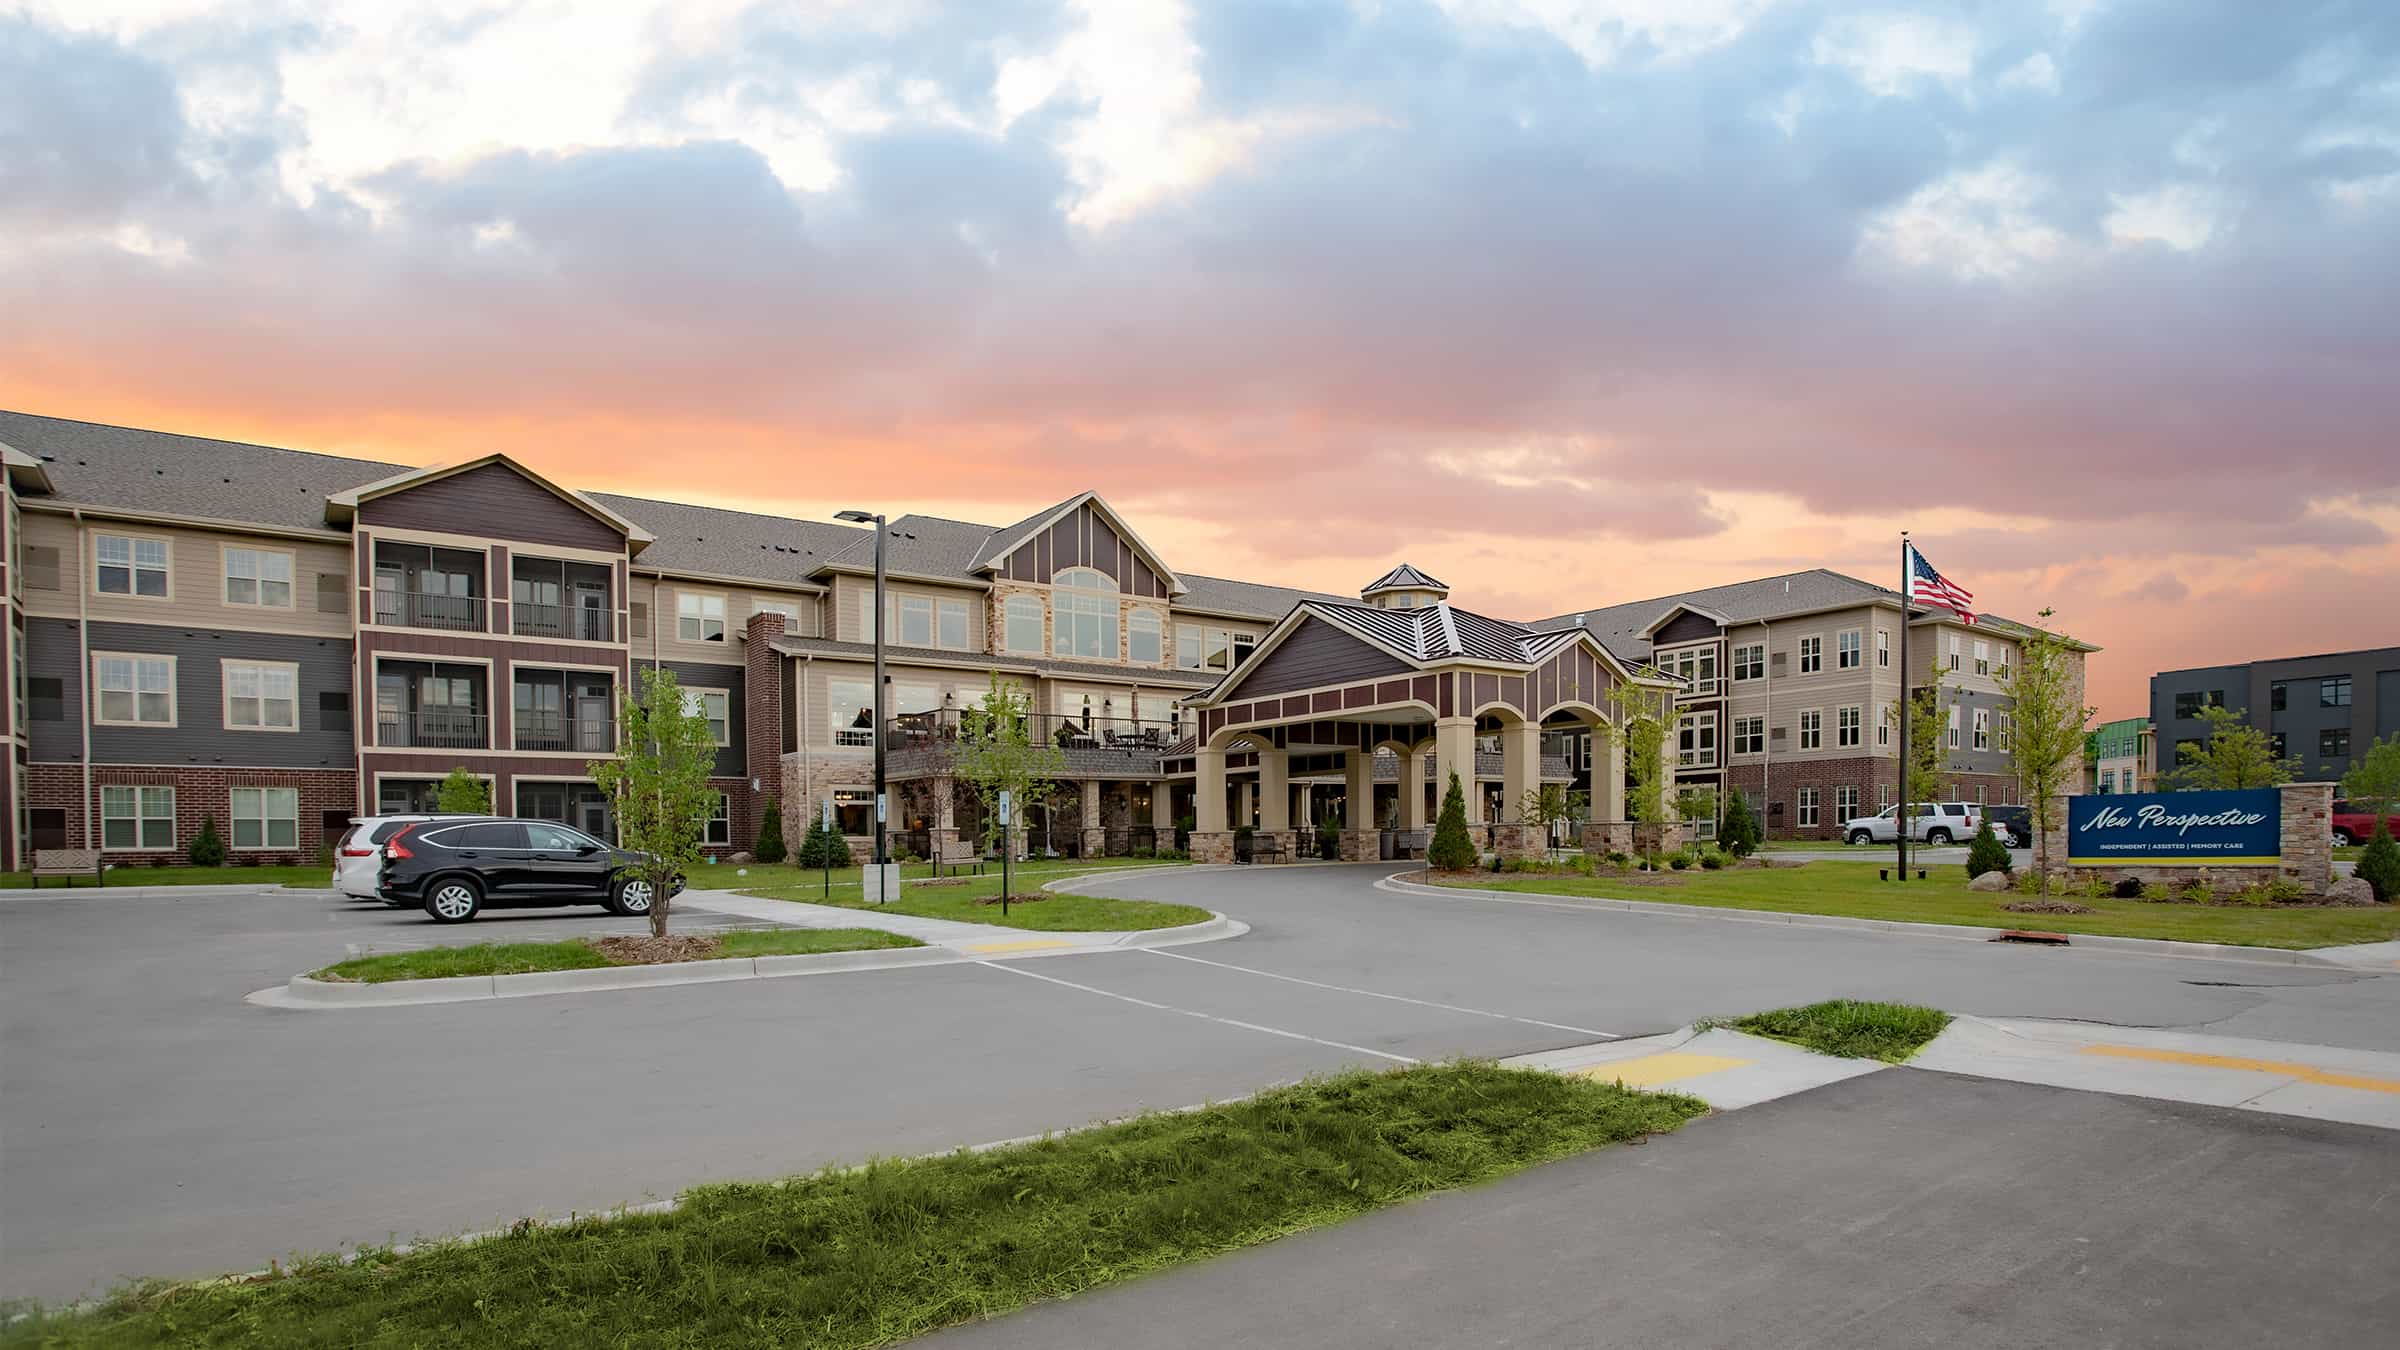 New Perspectives Senior Living Building Exterior